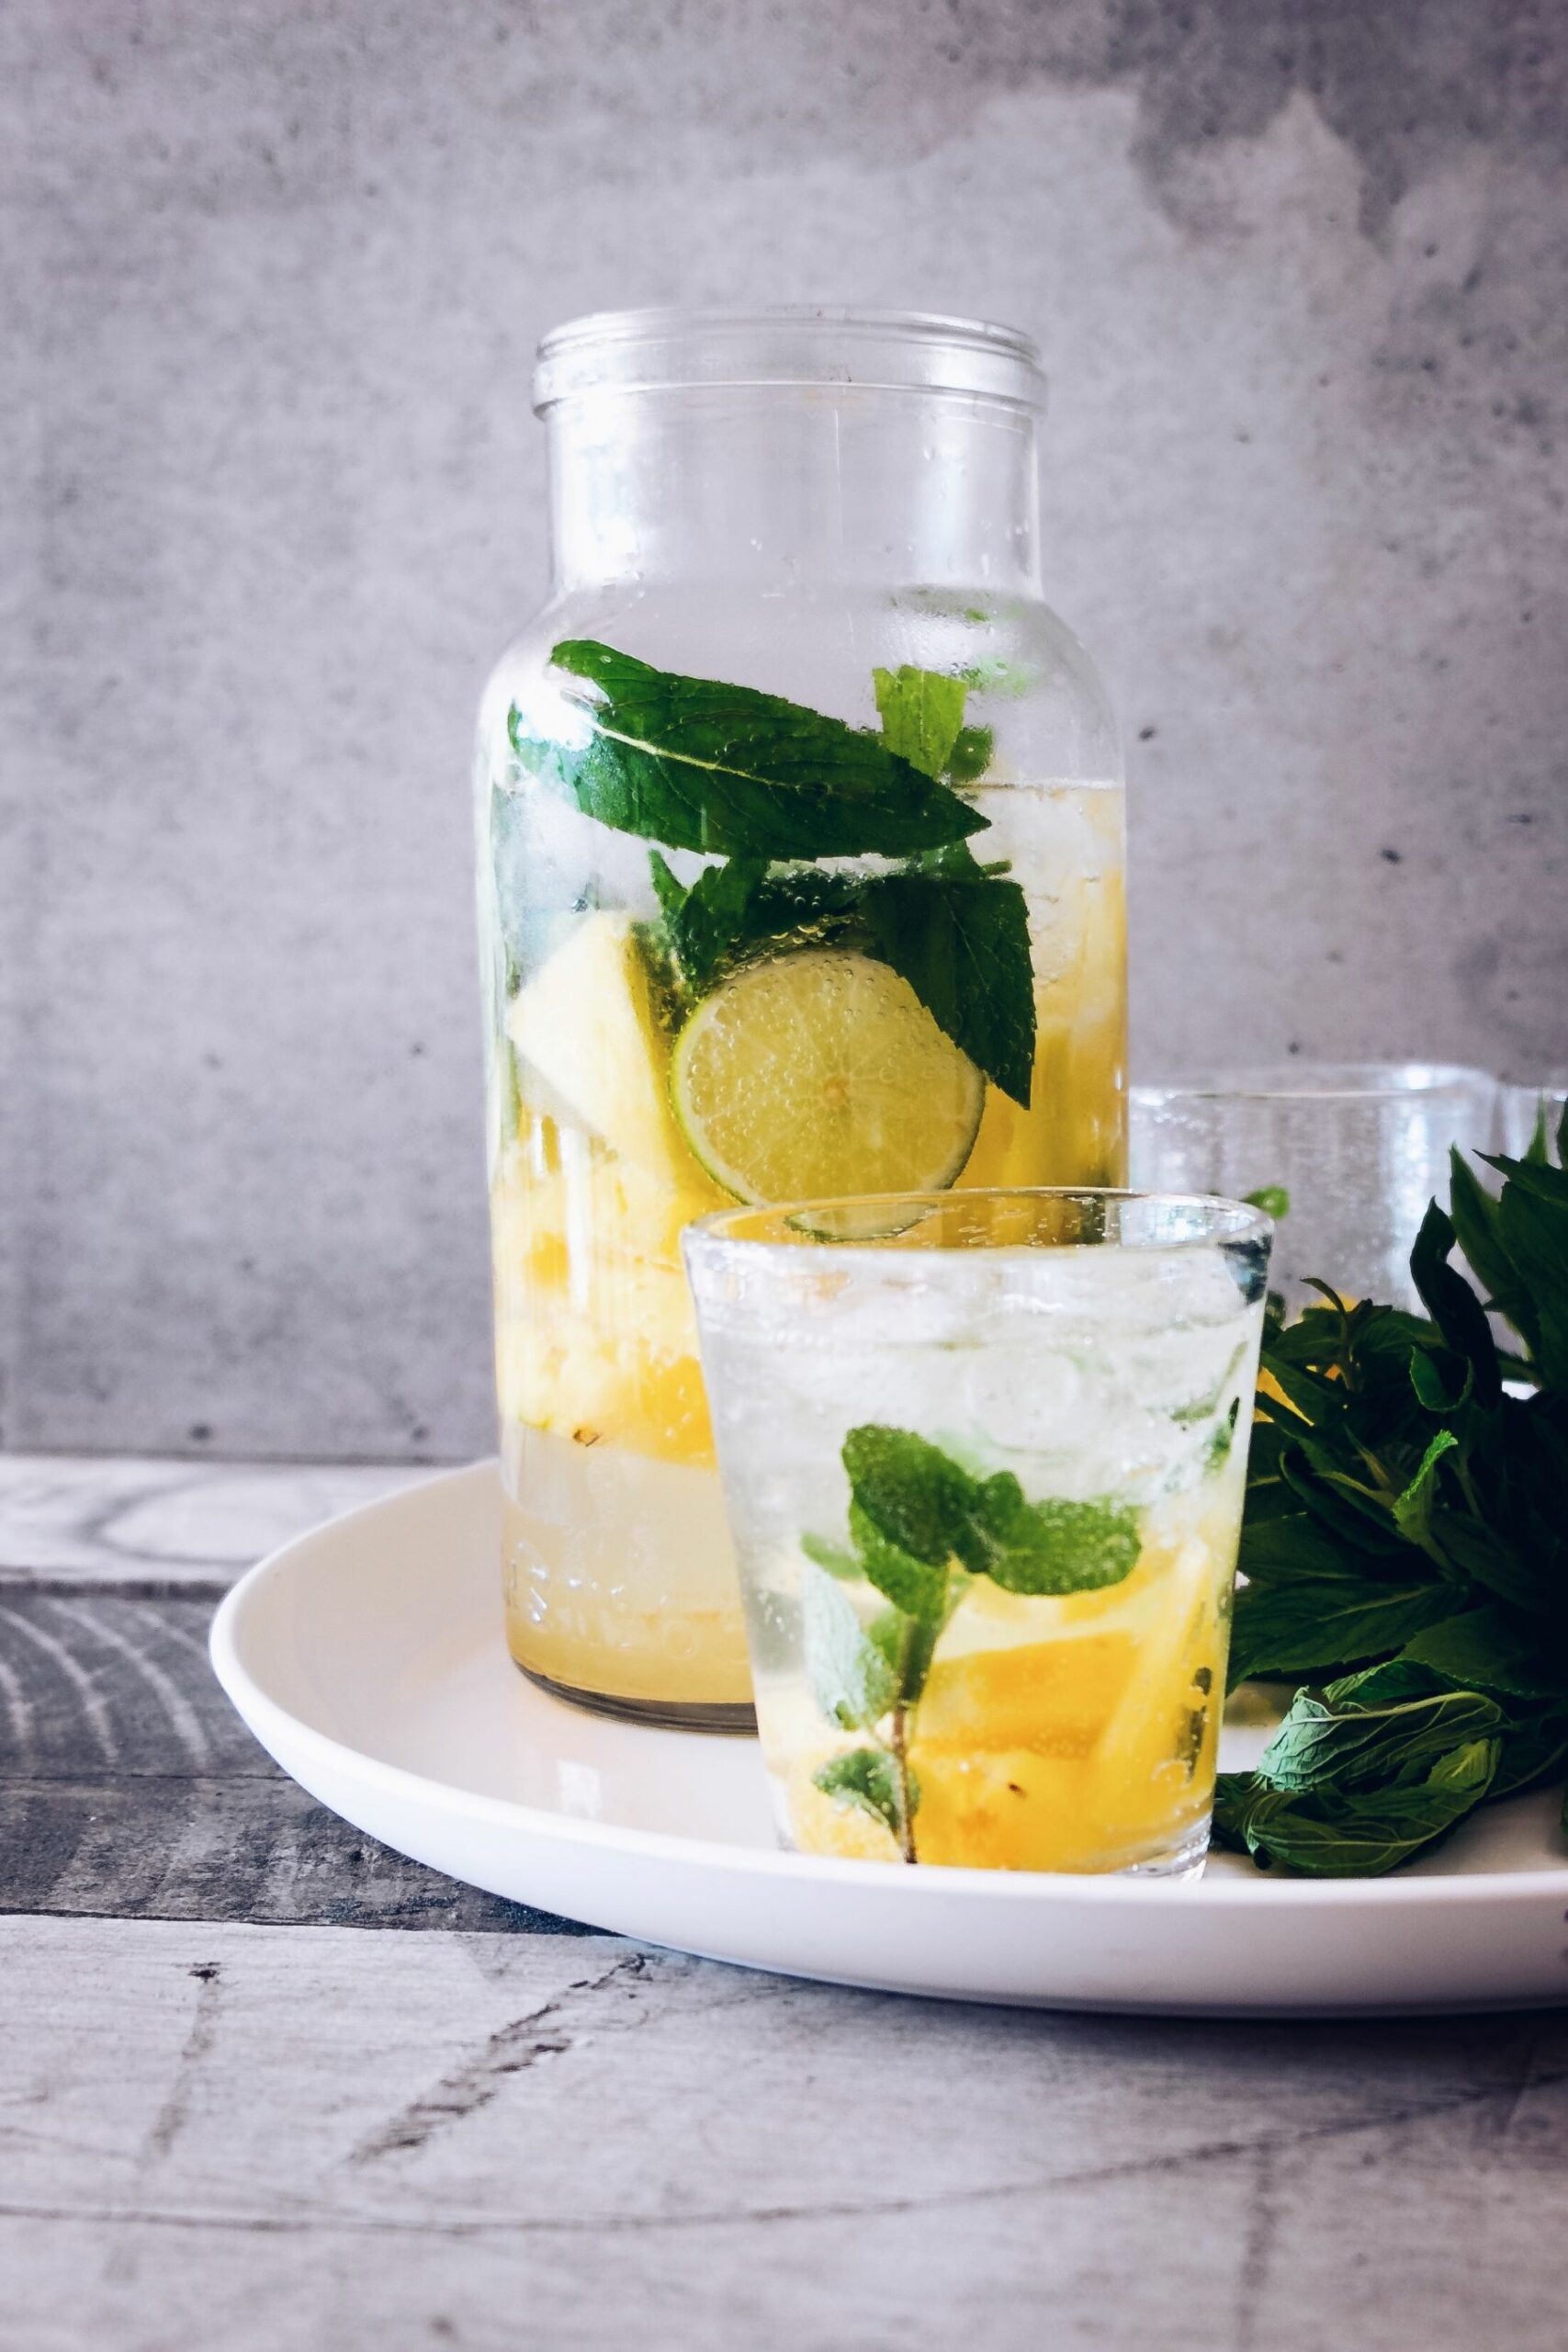 An image of a pitcher of water with lemon and mint.